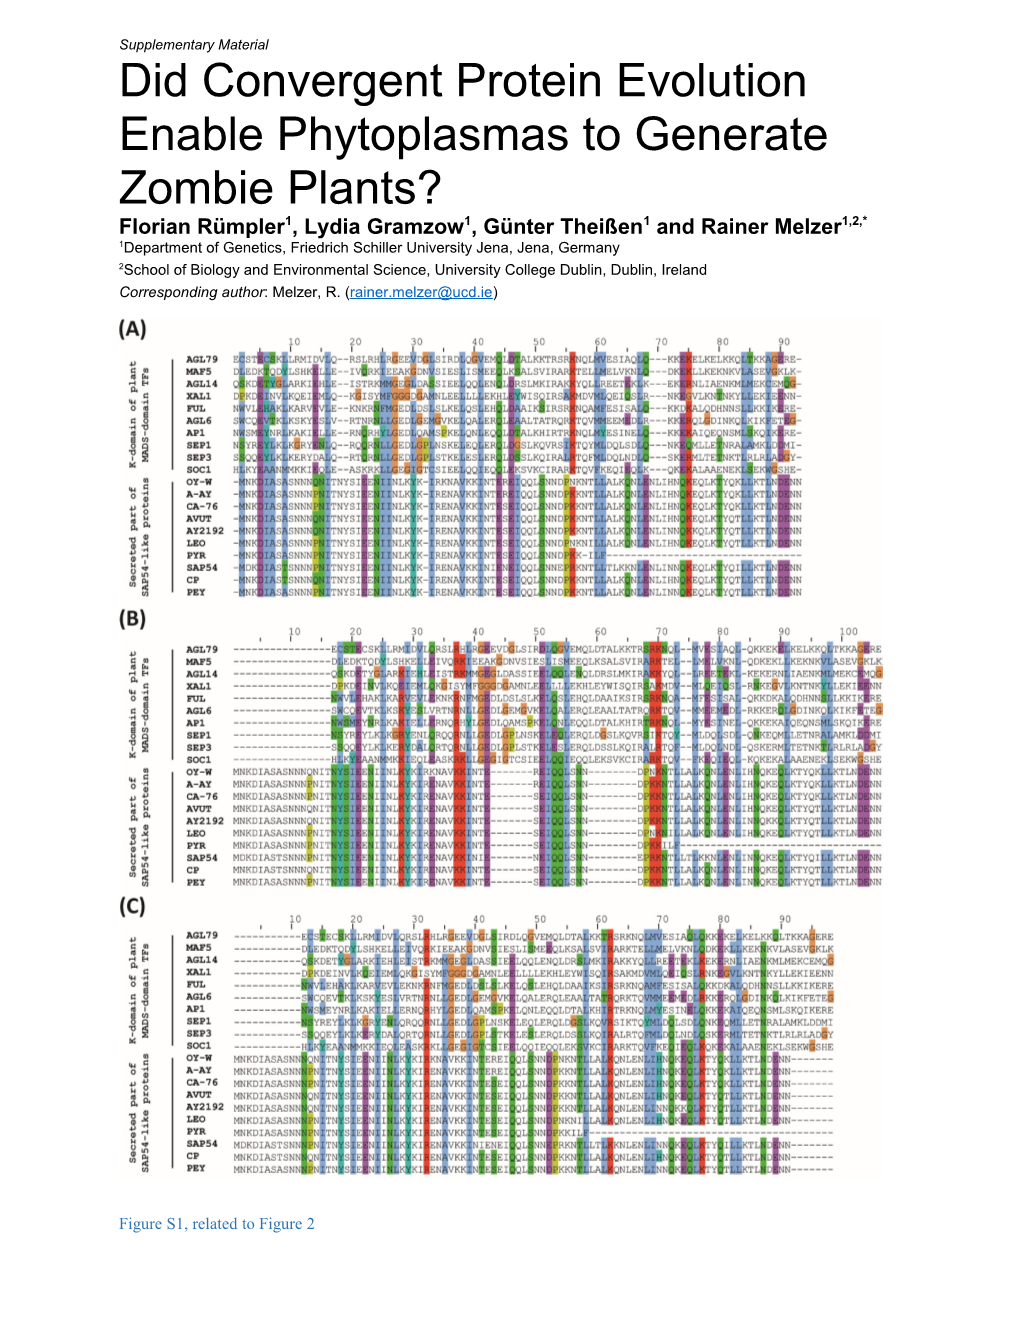 Did Convergent Protein Evolution Enable Phytoplasmas to Generate Zombie Plants?